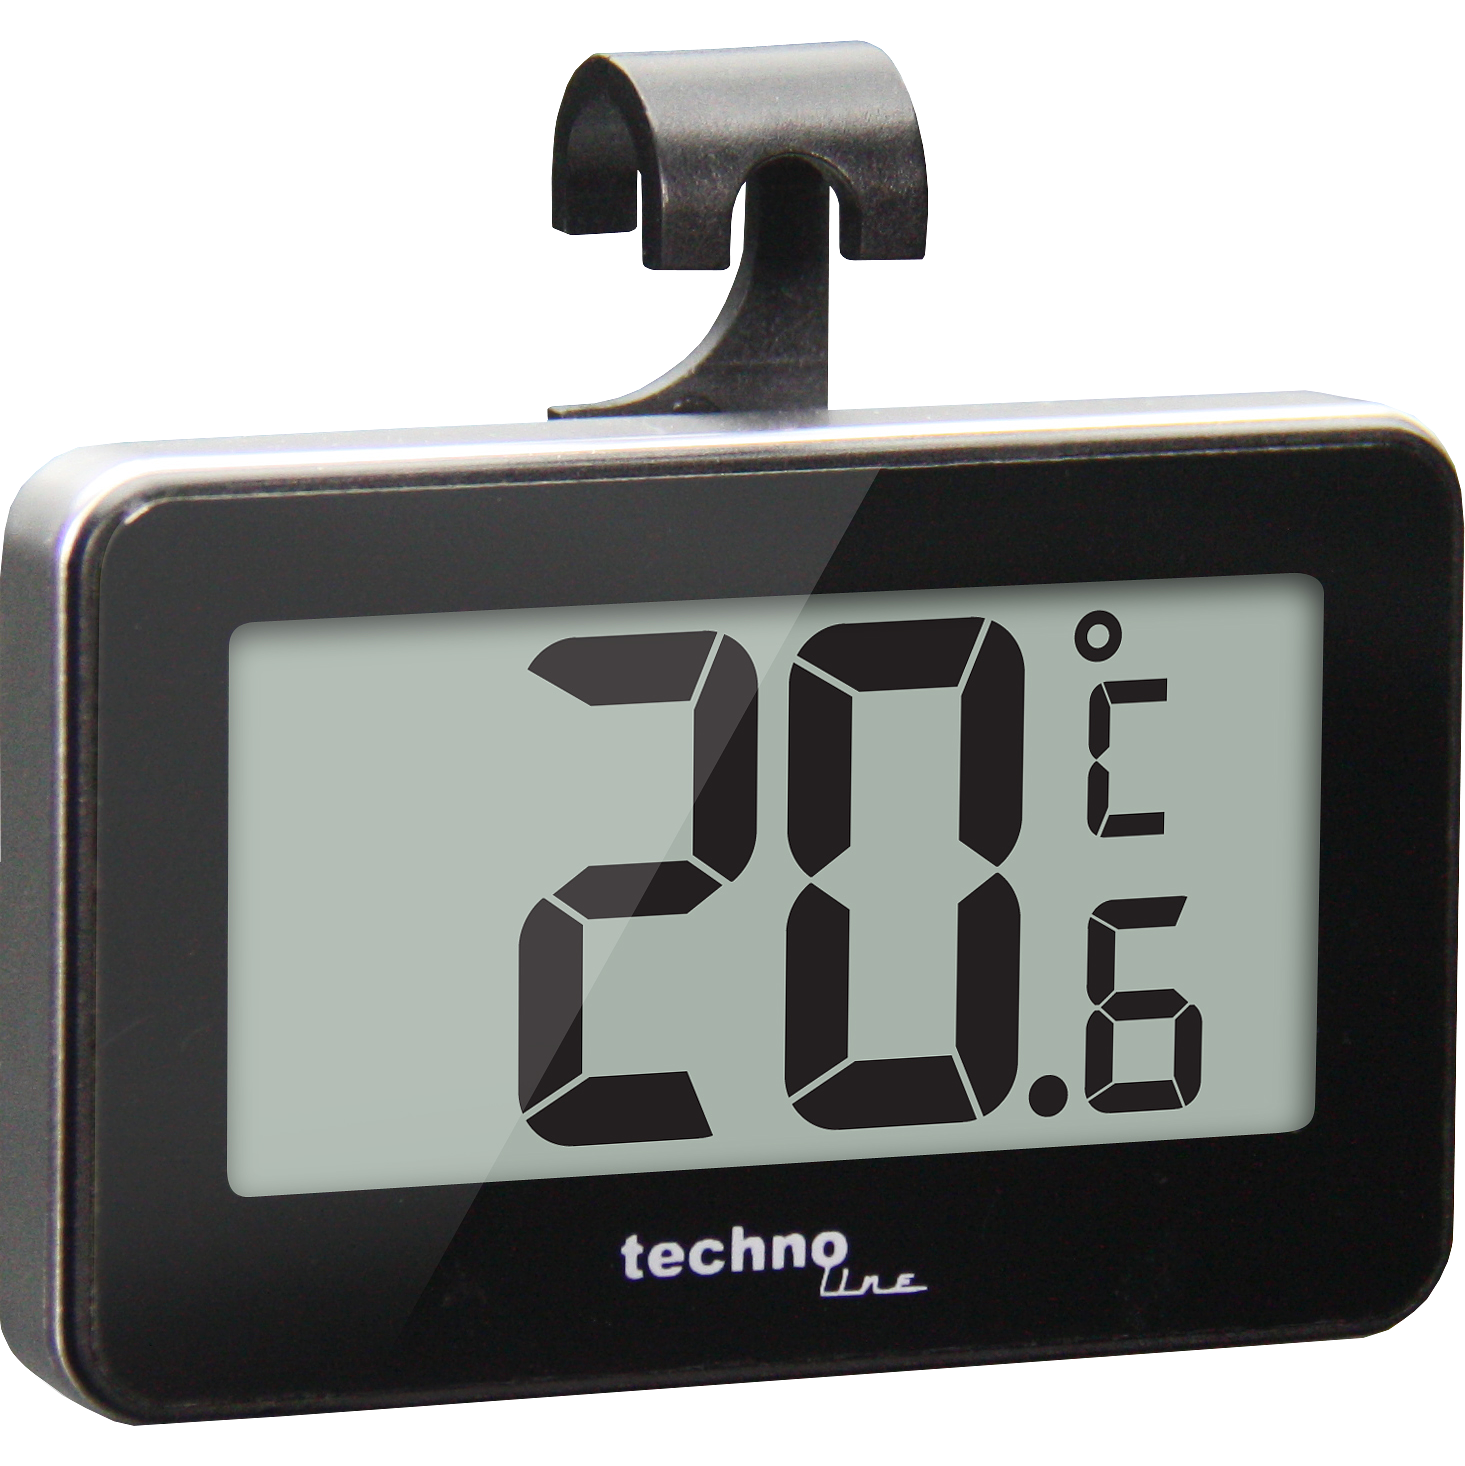 WS 7012 - thermometer